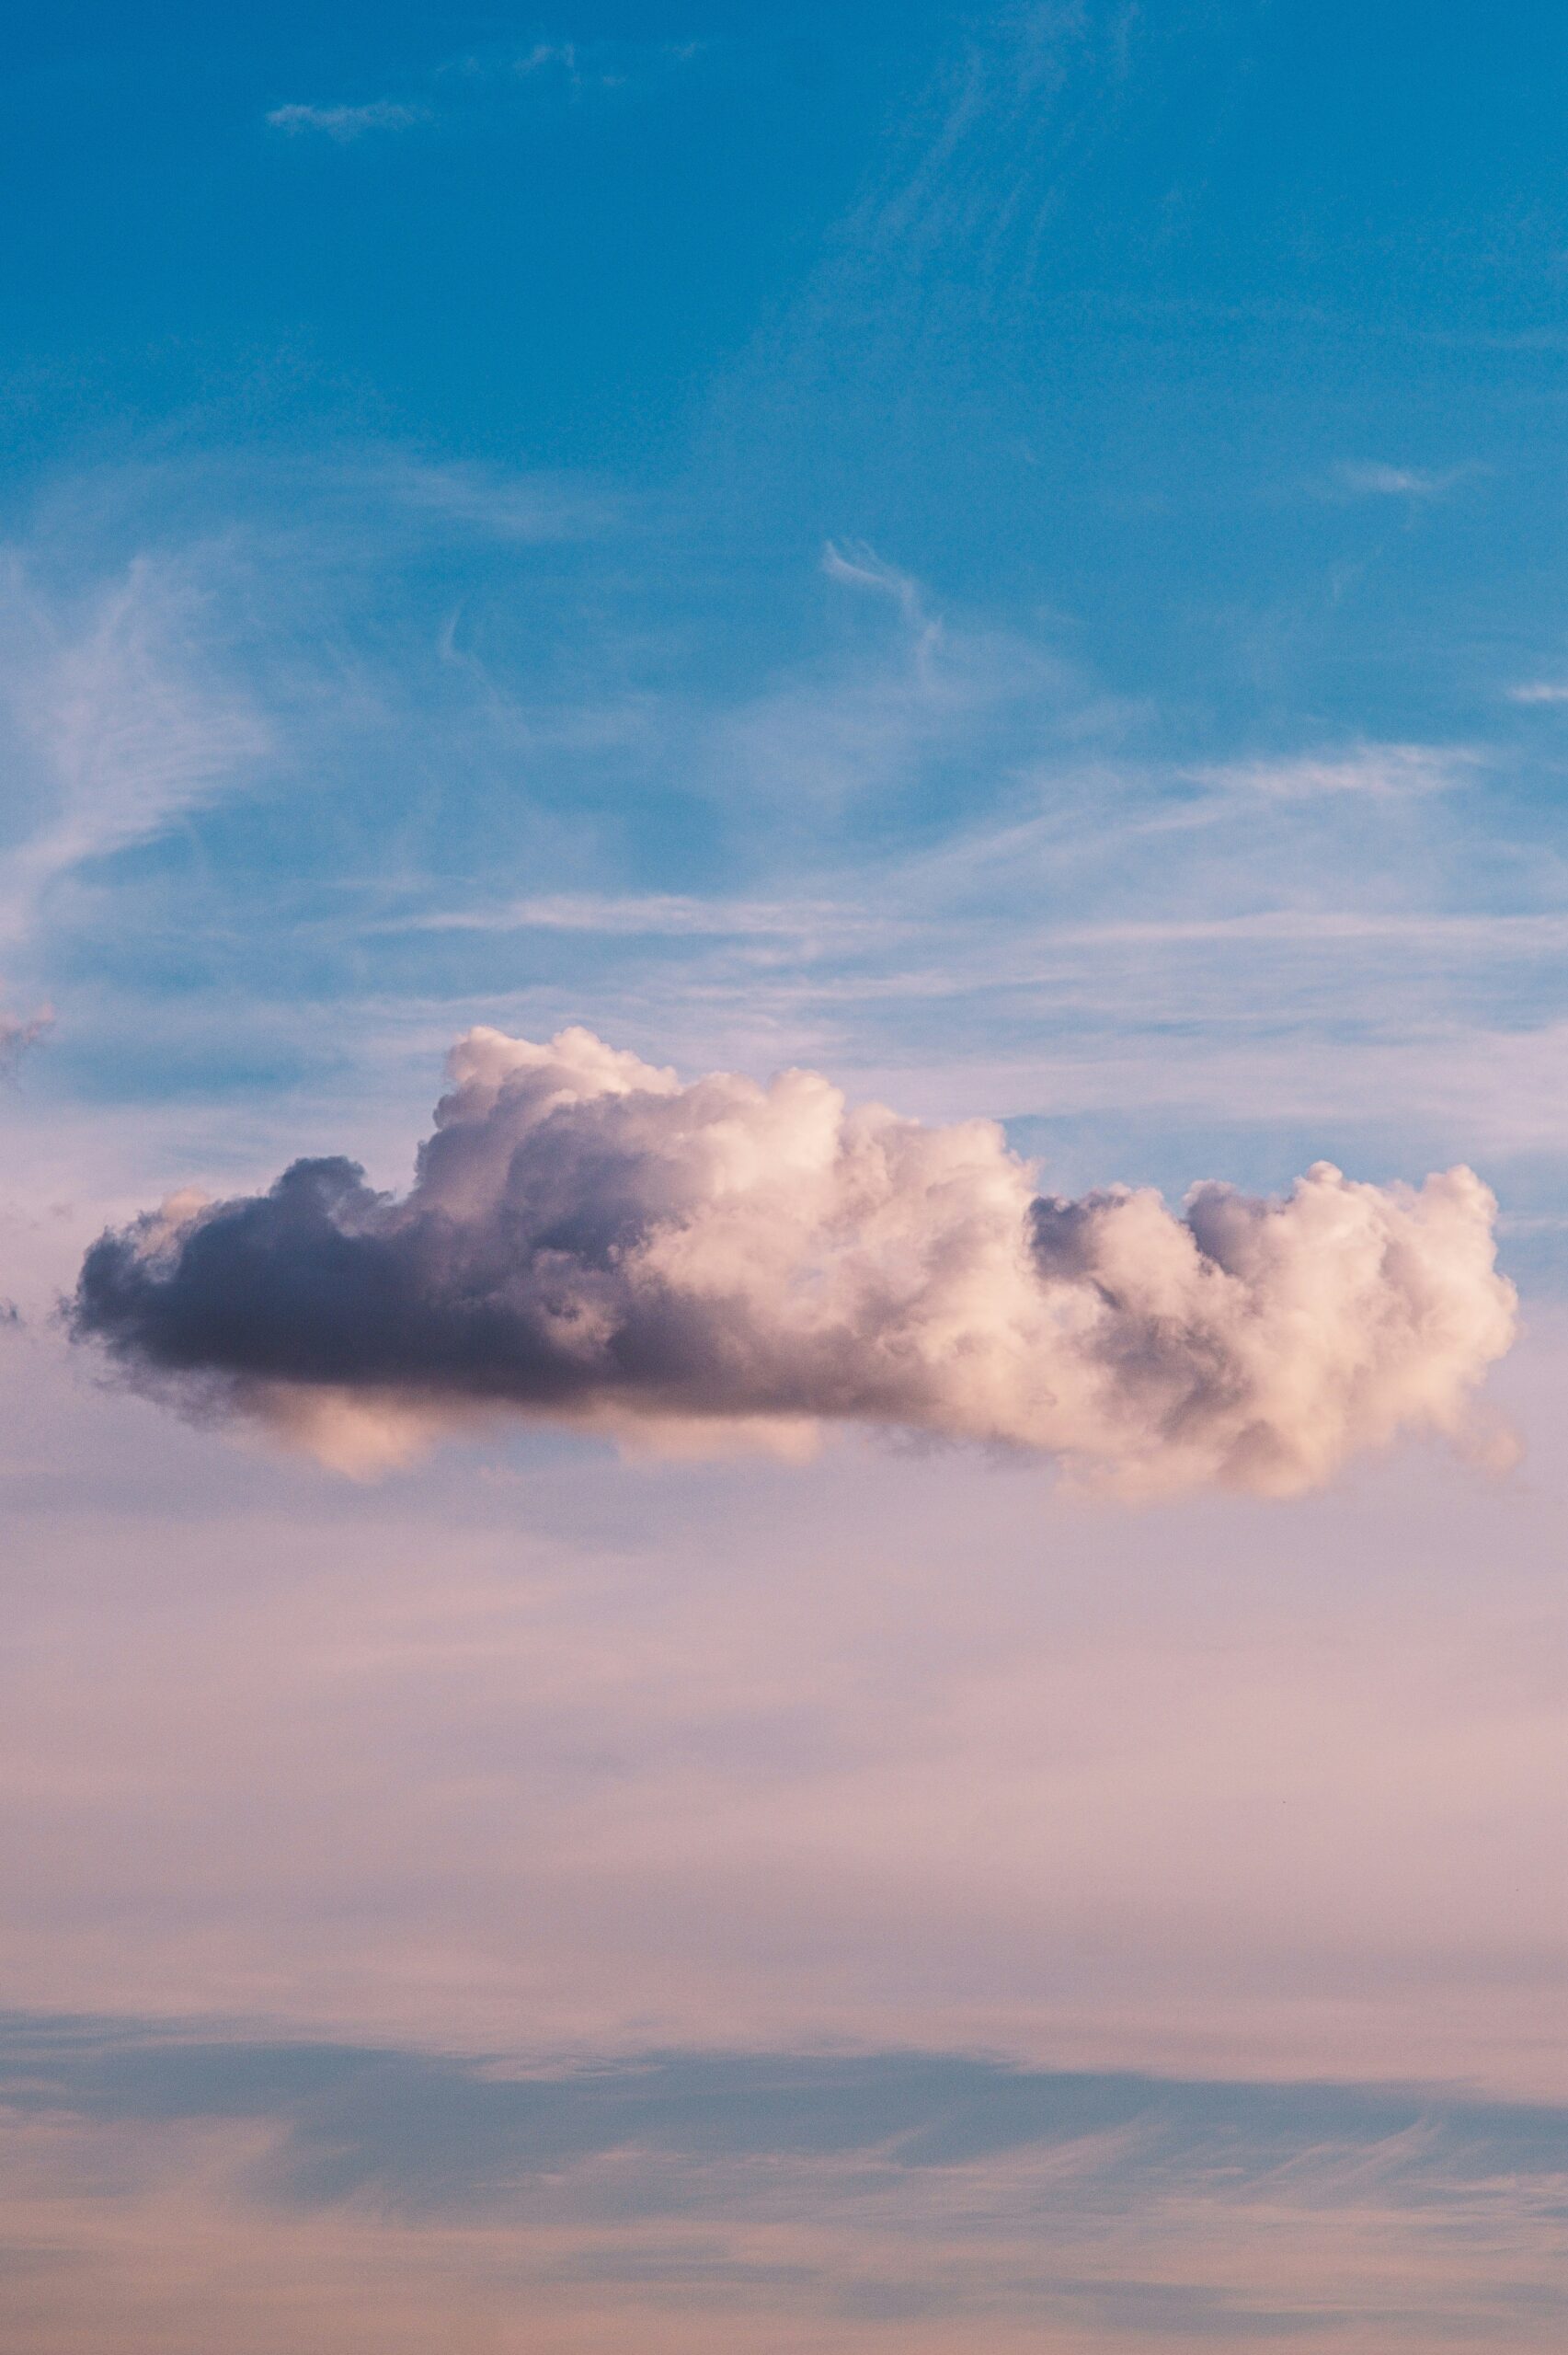 A solitary cumulus cloud against a pastel blue and pink sky at either sunrise or sunset.